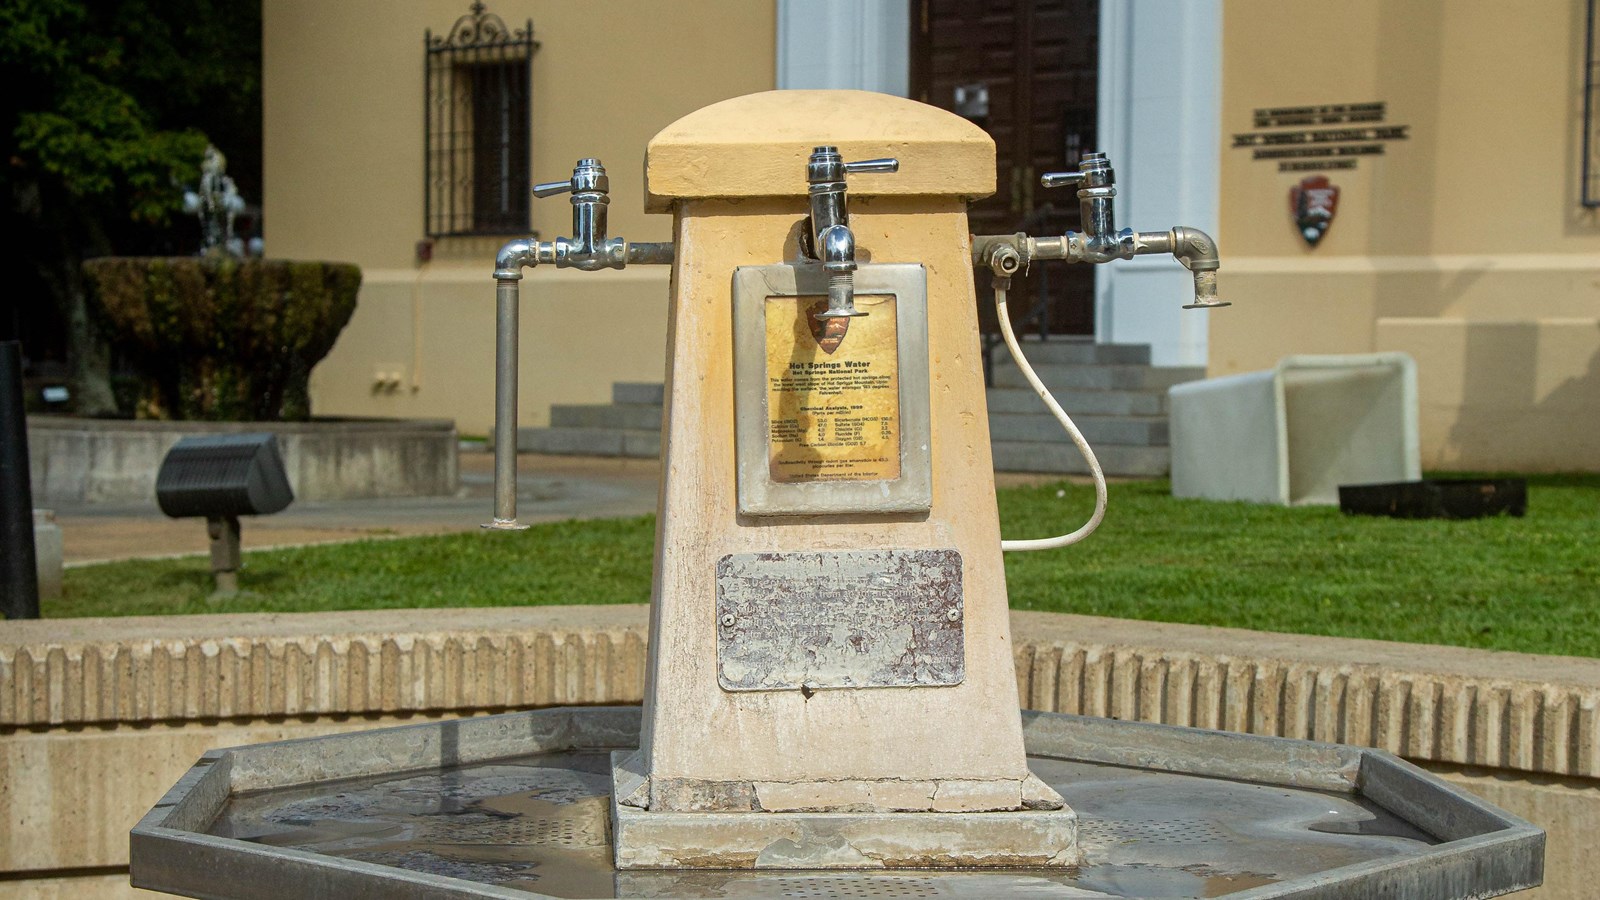 A water fountain with four spouts on each side 